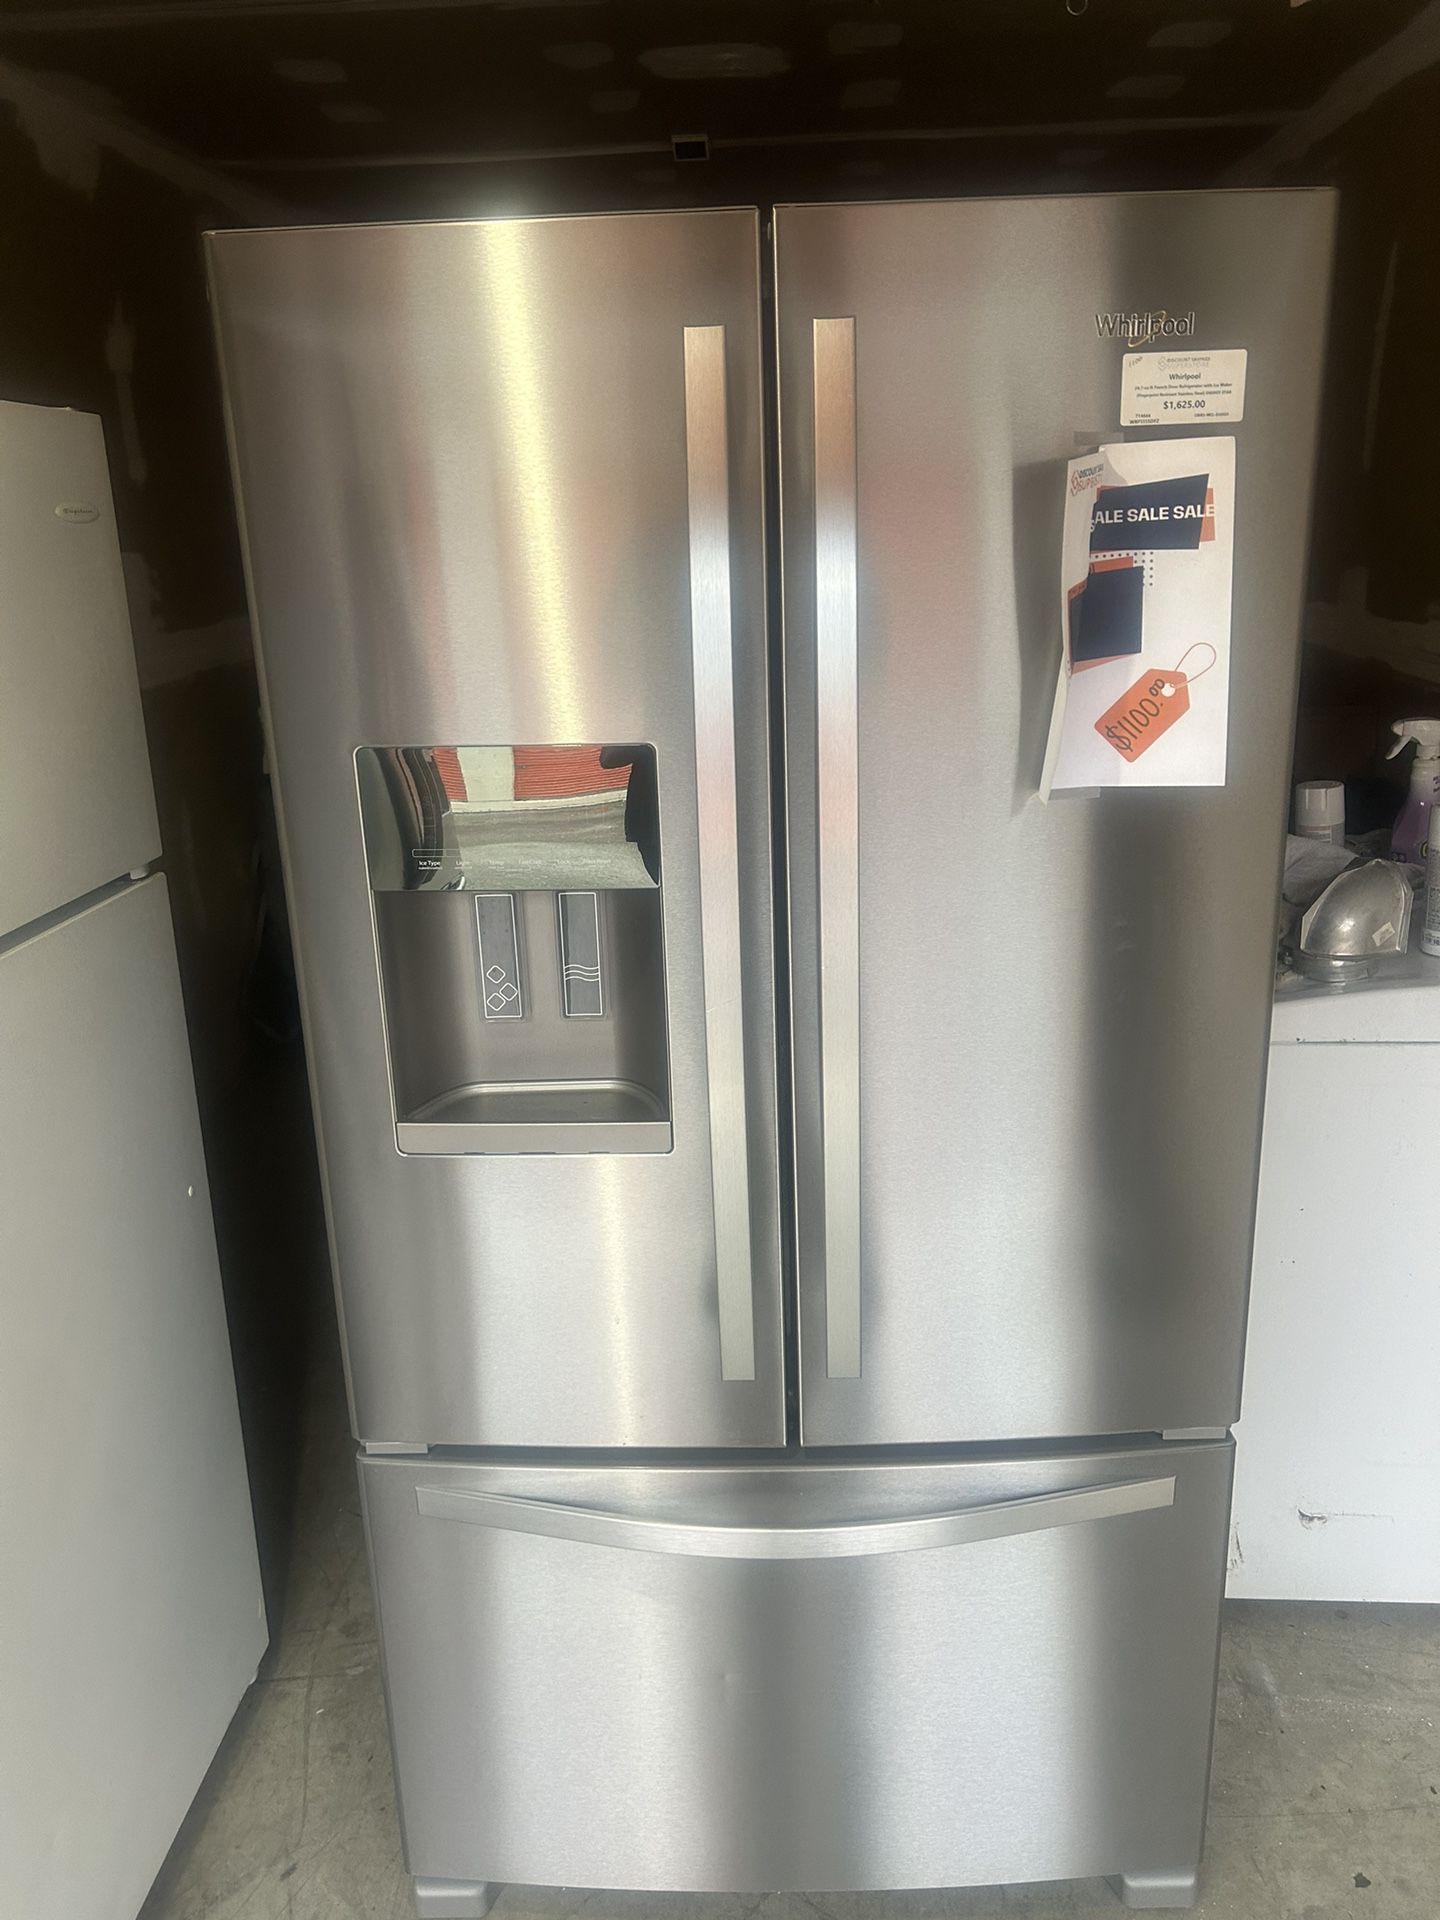 **BRAND NEW WHIRLPOOL STAINLESS STEEL FRENCH DOOR REFRIGERATOR **(1 yr Manufacturers warranty)